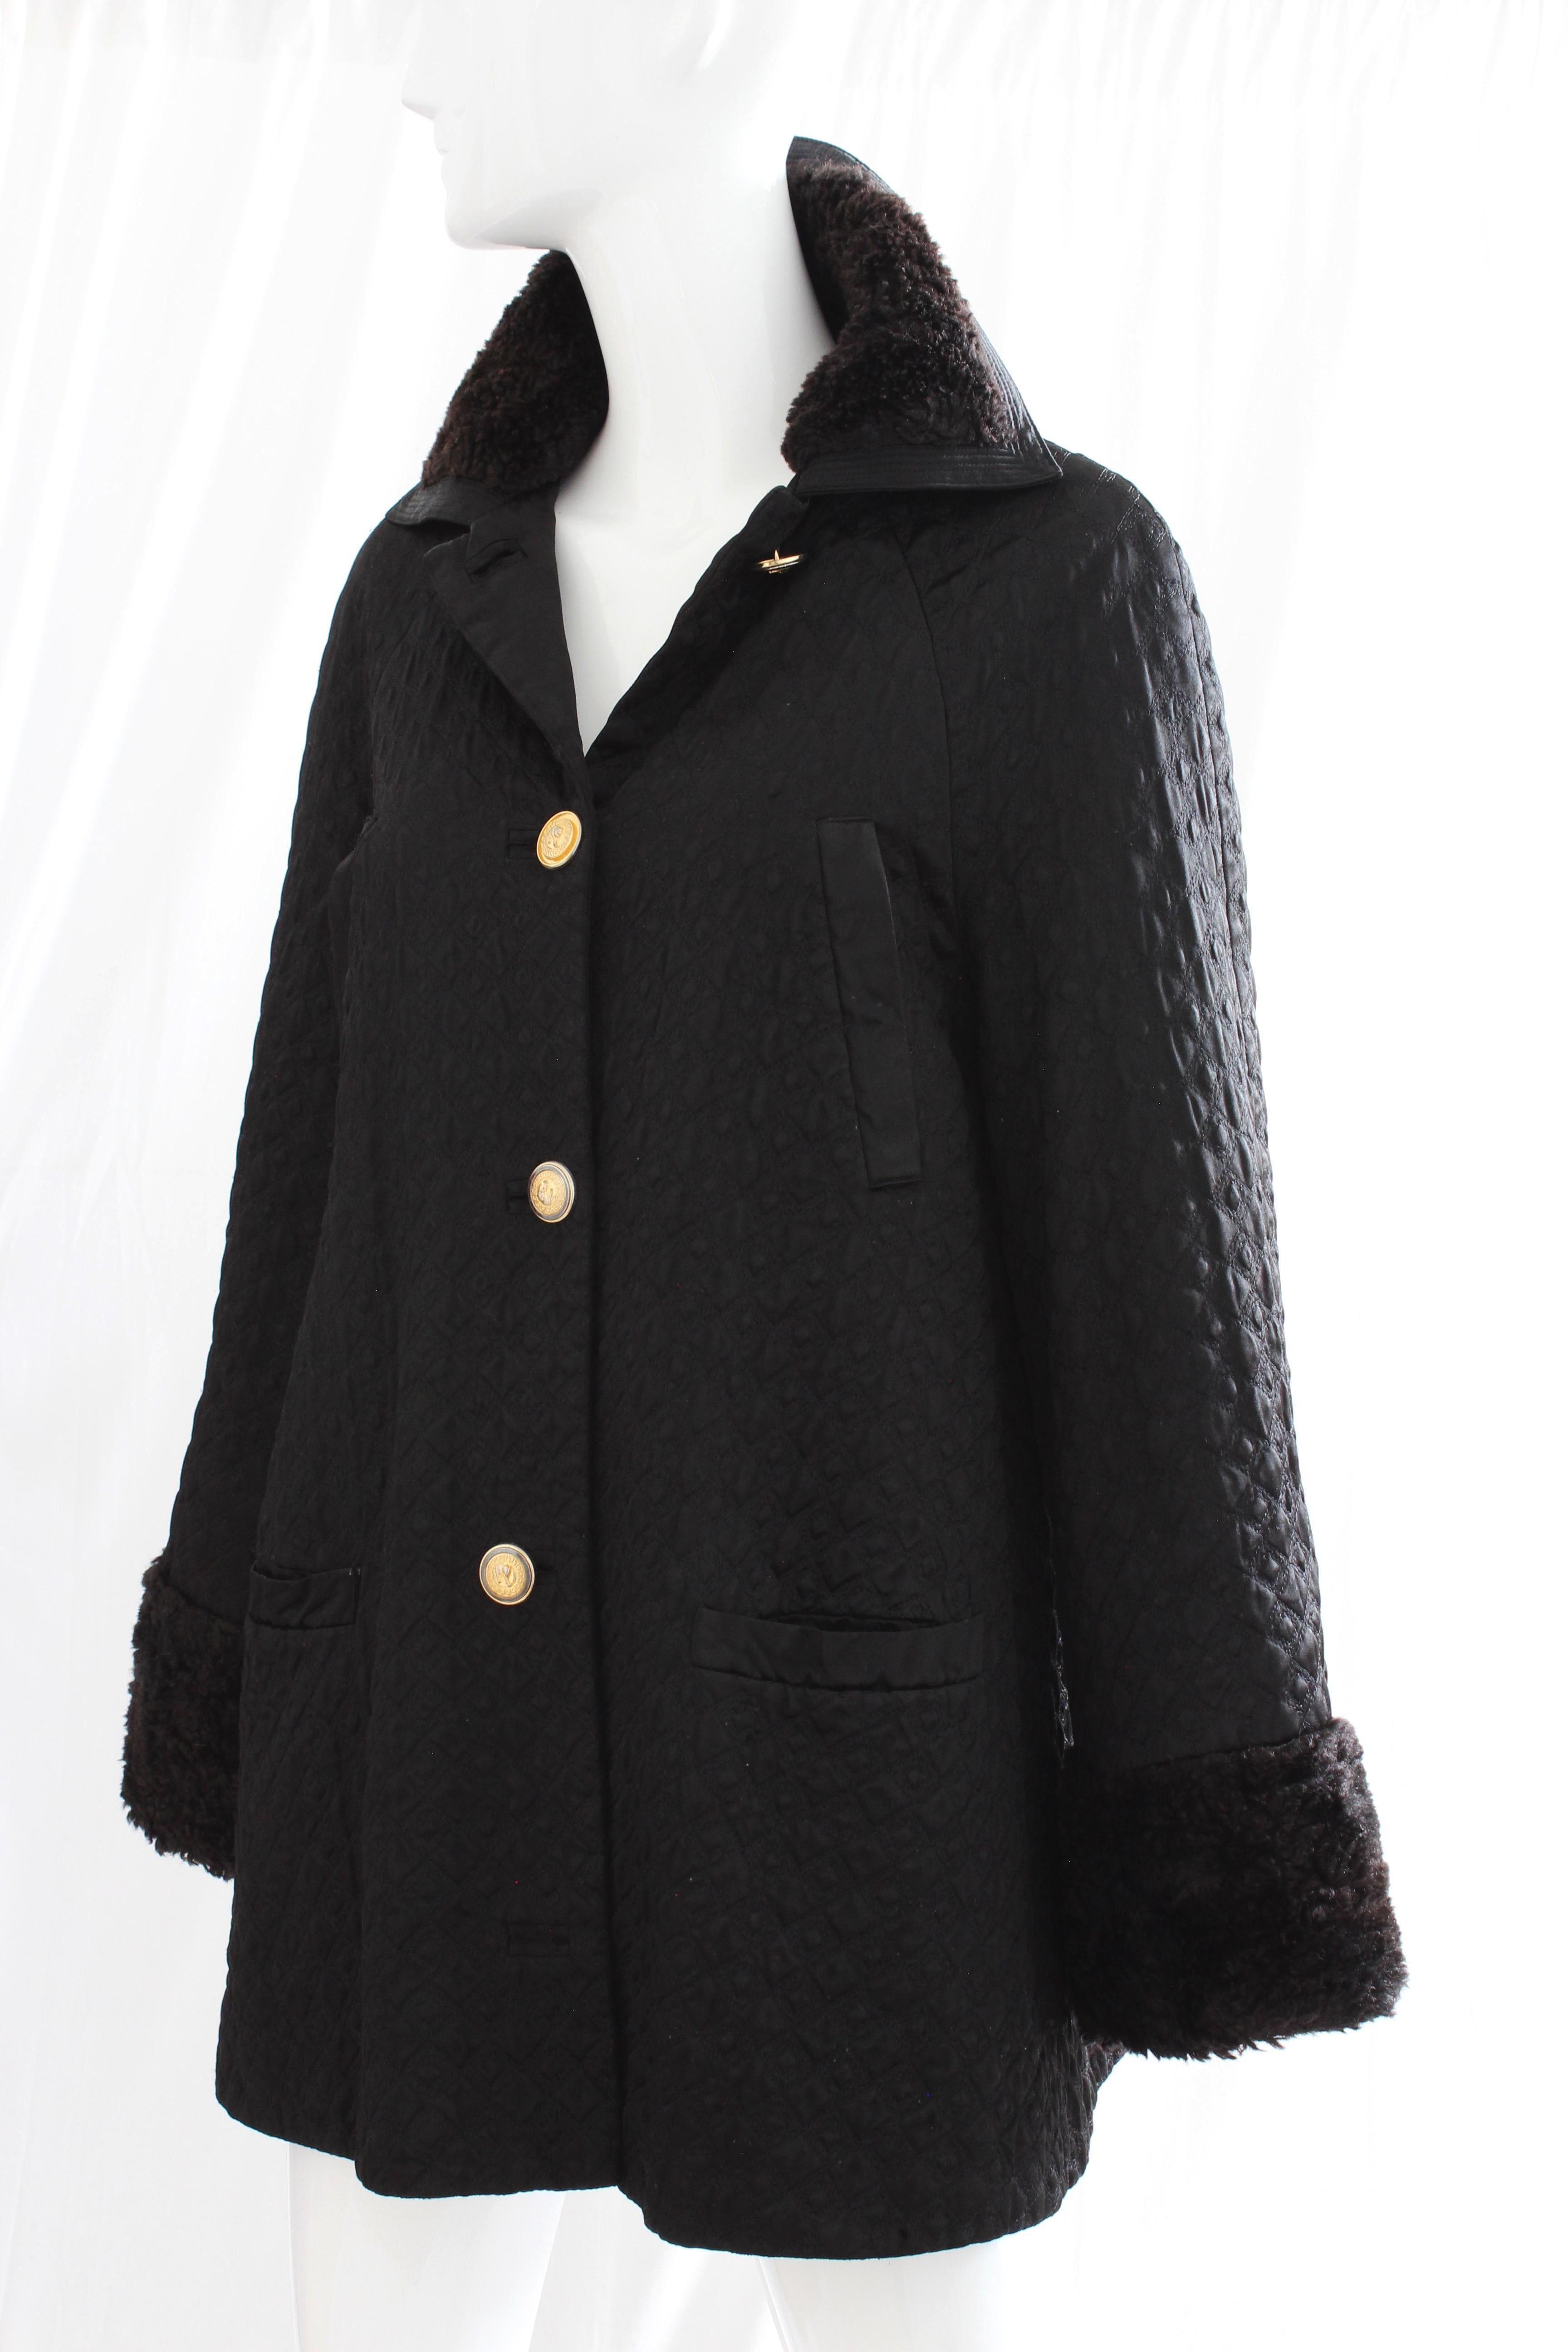 Gianni Versace Jacket or Swing Coat Diamond Quilted Black Satin with Fur Trim 38 1